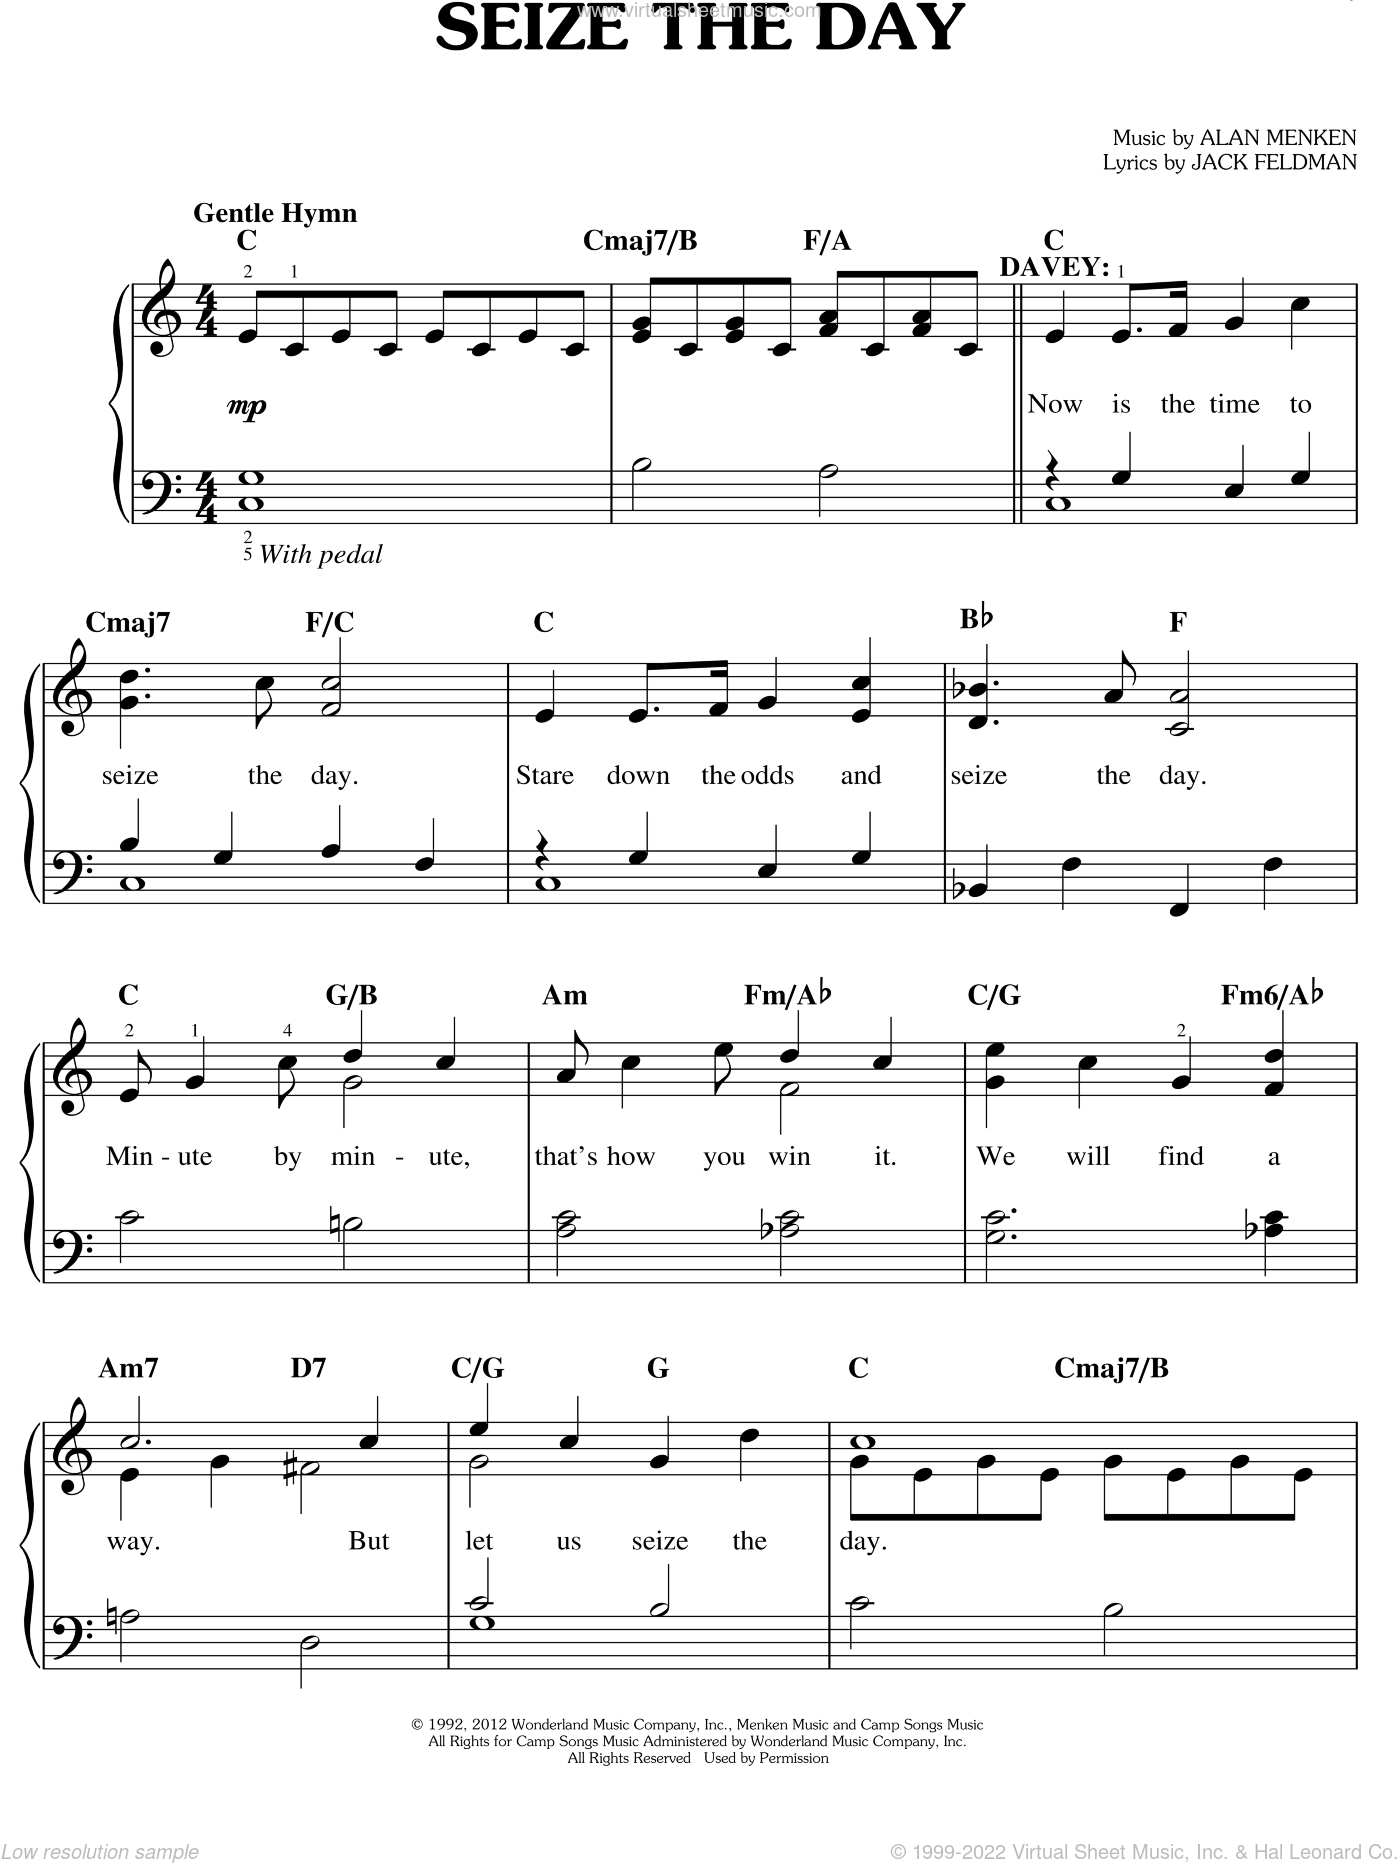 Menken - Seize The Day sheet music for piano solo [PDF]